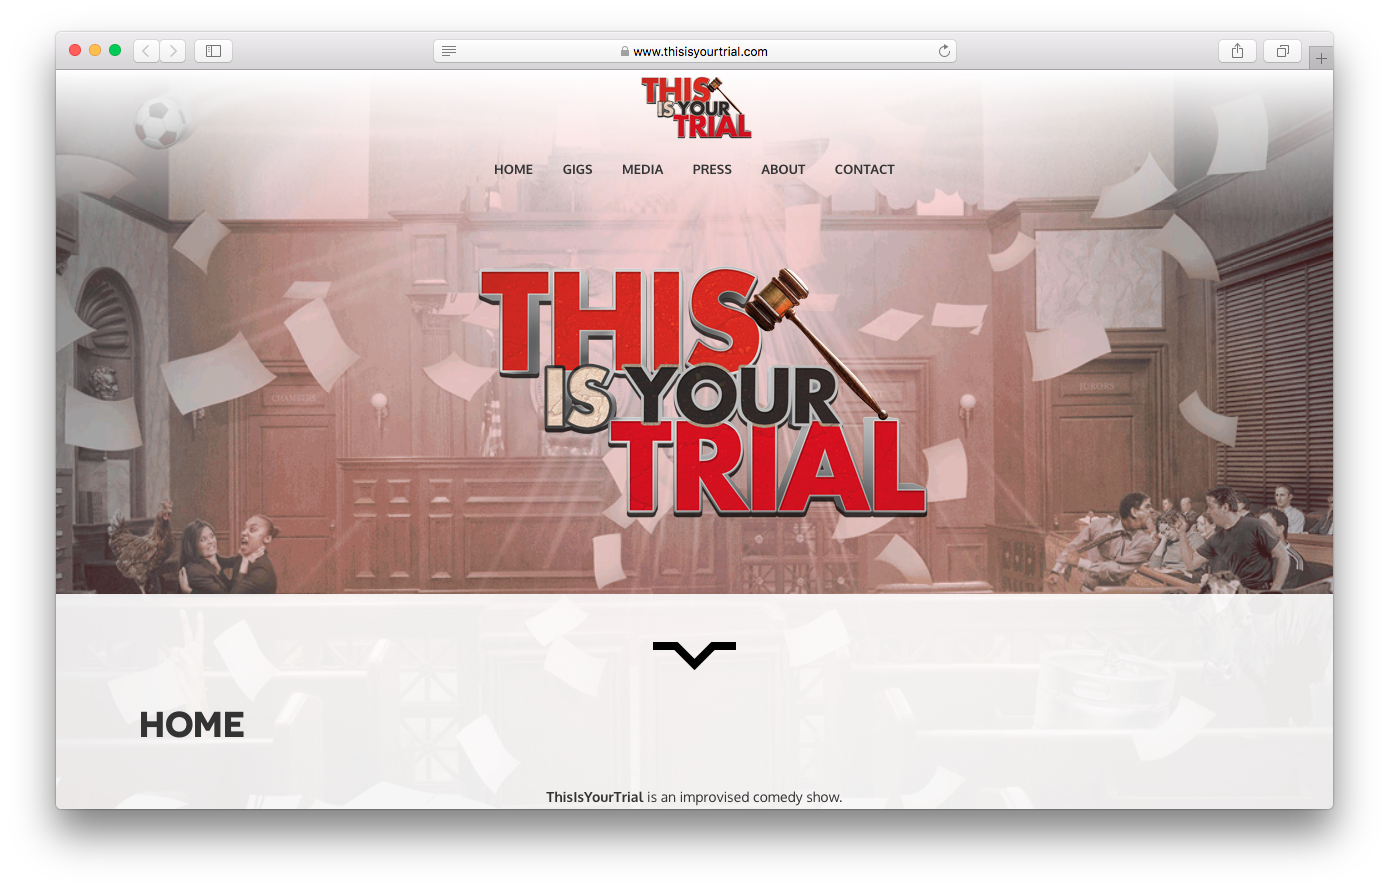 This Is Your Trial - www.thisisyourtrial.com